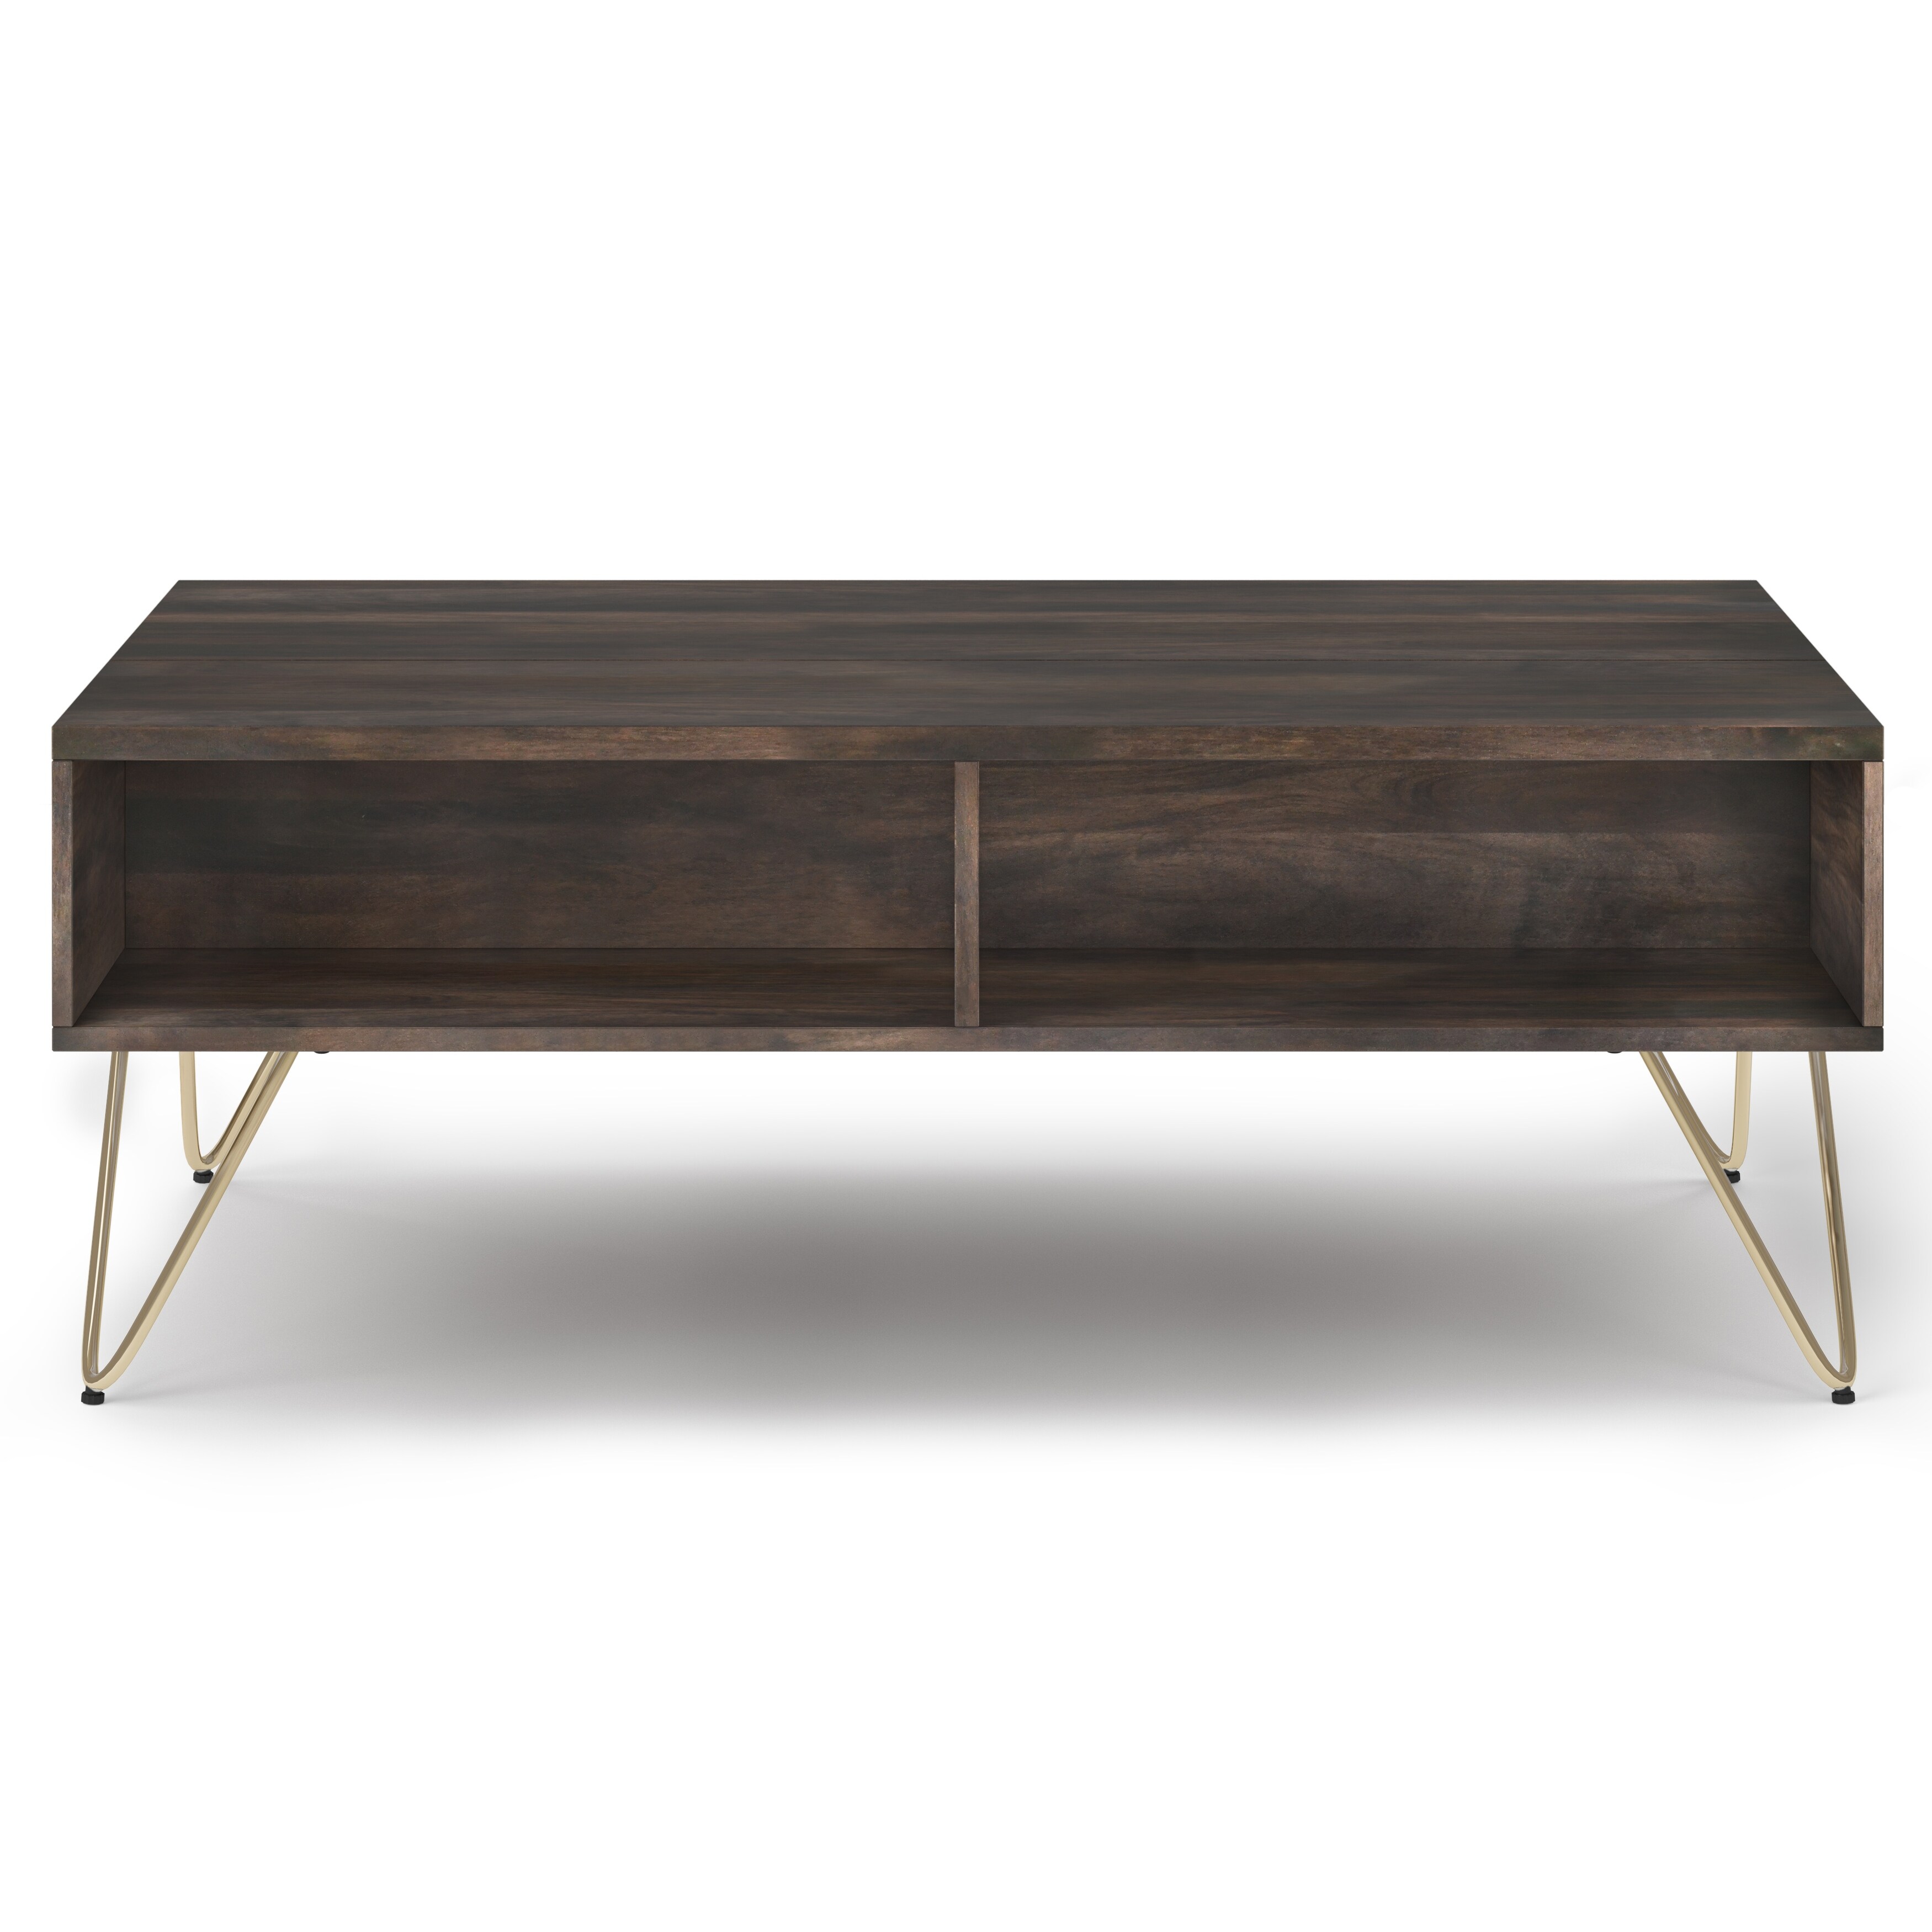 WyndenHall Moreno Mango Wood Metal Rectangle Industrial Lift Top Coffee Table Ebony 48 W x 24 D x 22 H - image 4 of 5